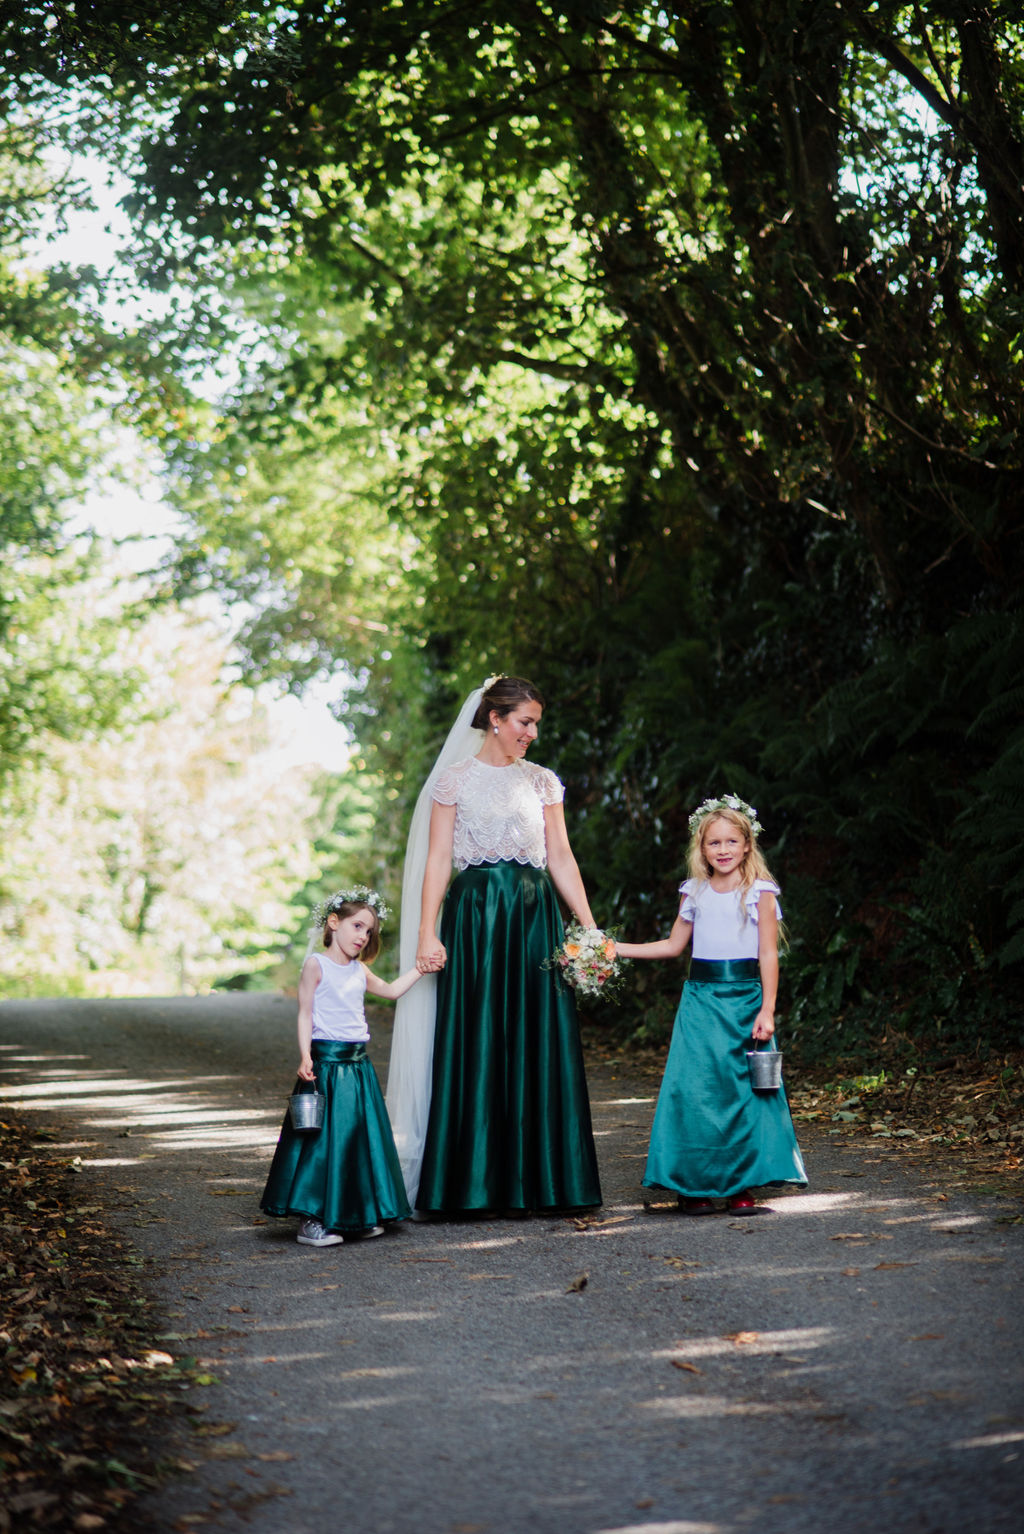 Rustic barn wedding photography by Liberty Pearl Photo & Film Collective. Bride and children walk through woods.